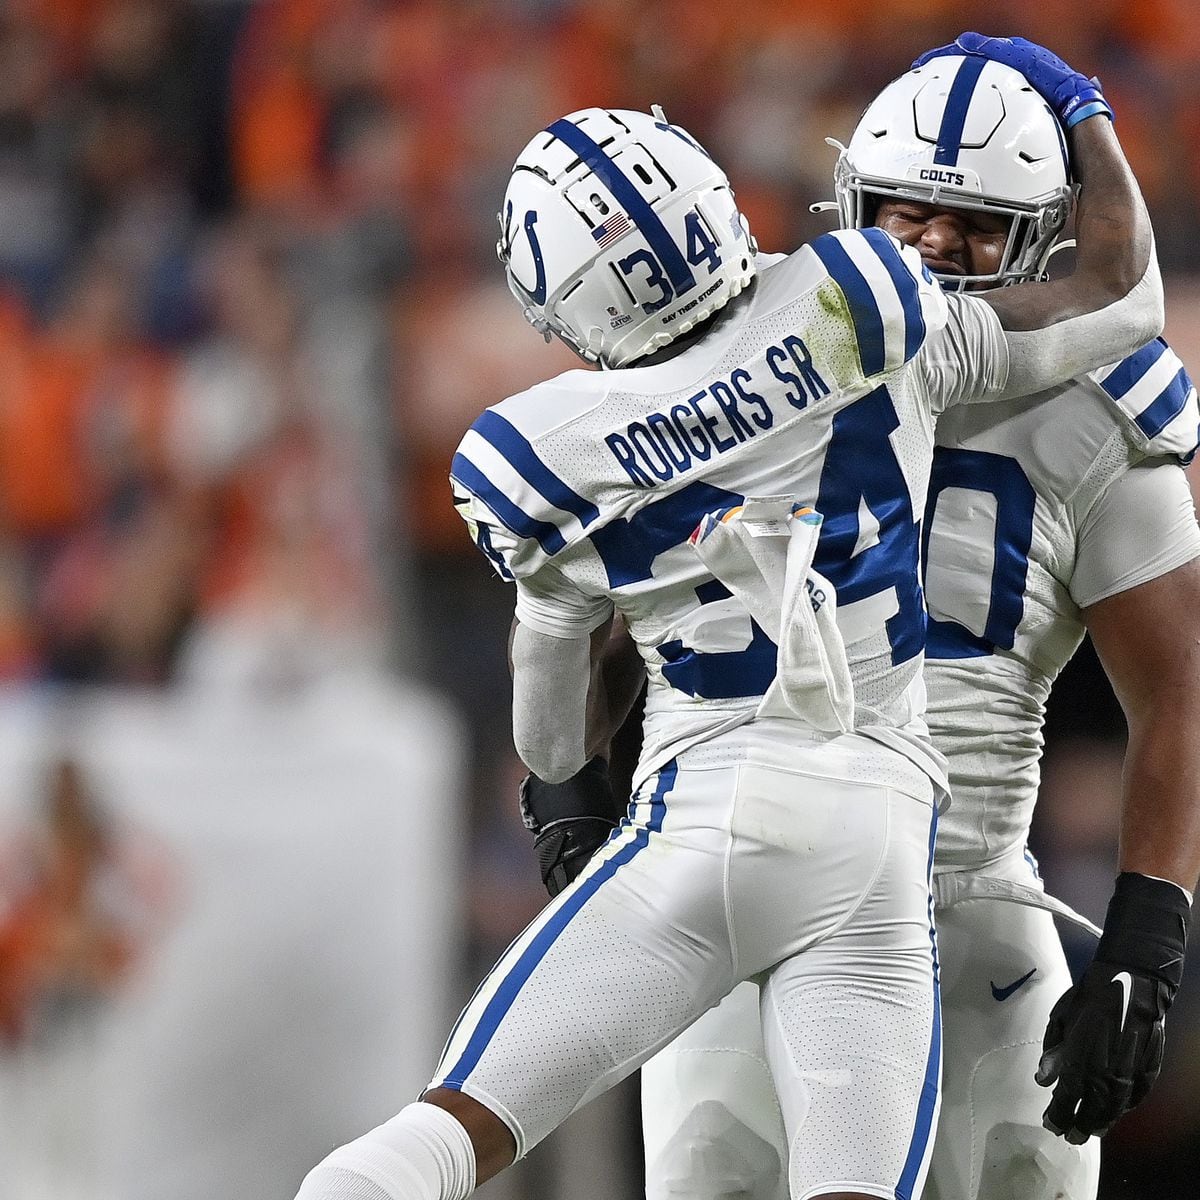 Who is Isaiah Rodgers, the Colts player being investigated for betting? -  AS USA